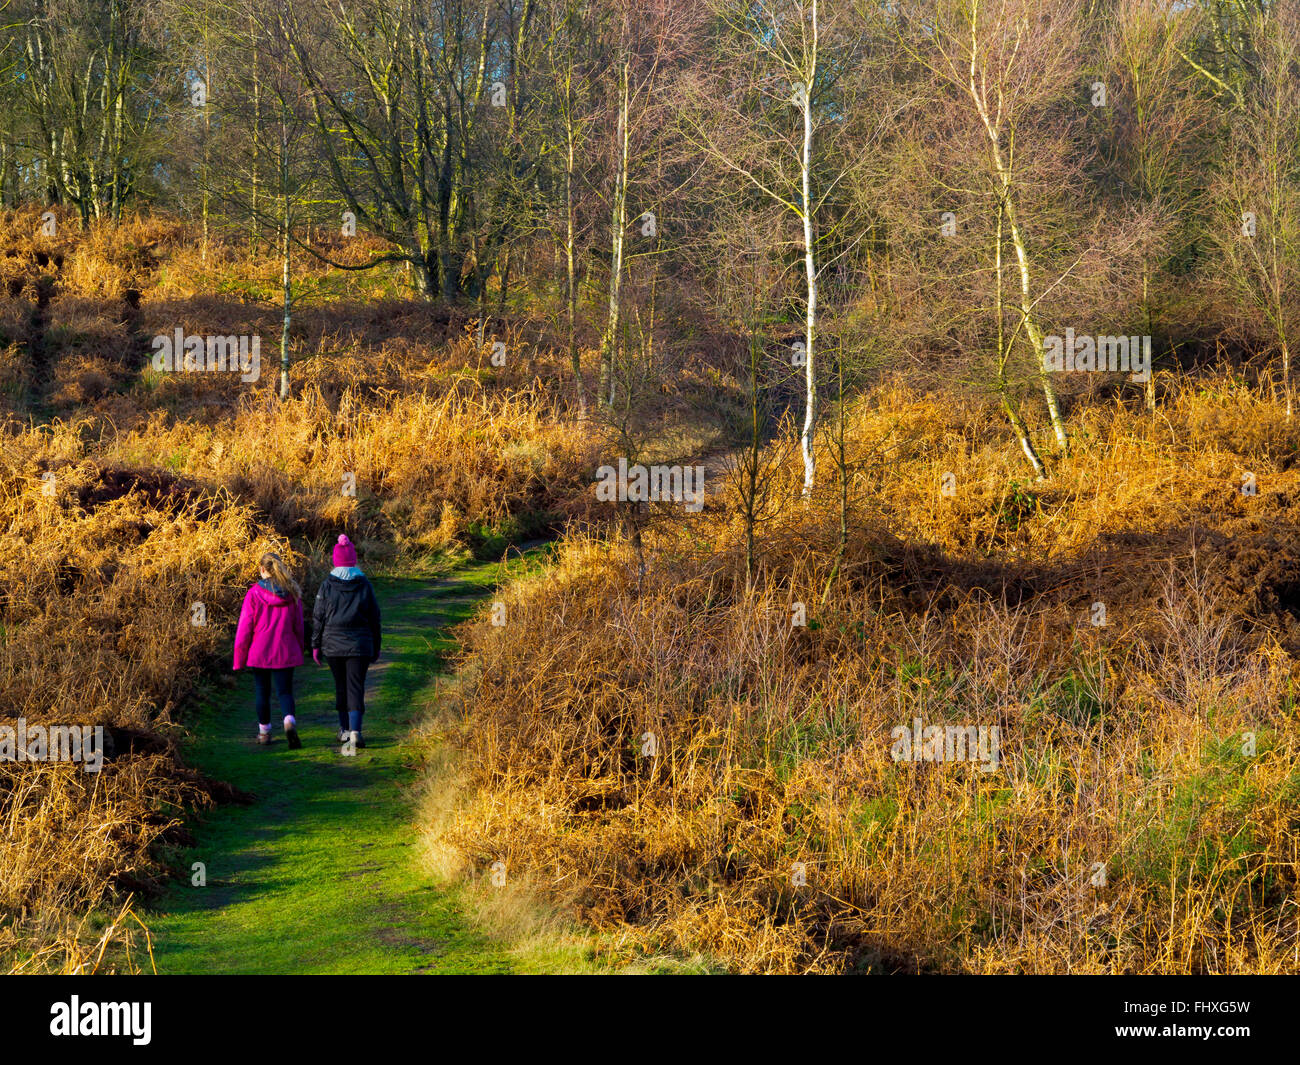 Family walking on footpath in winter on Stanton Moor near Matlock in the Peak District Derbyshire Dales England UK Stock Photo